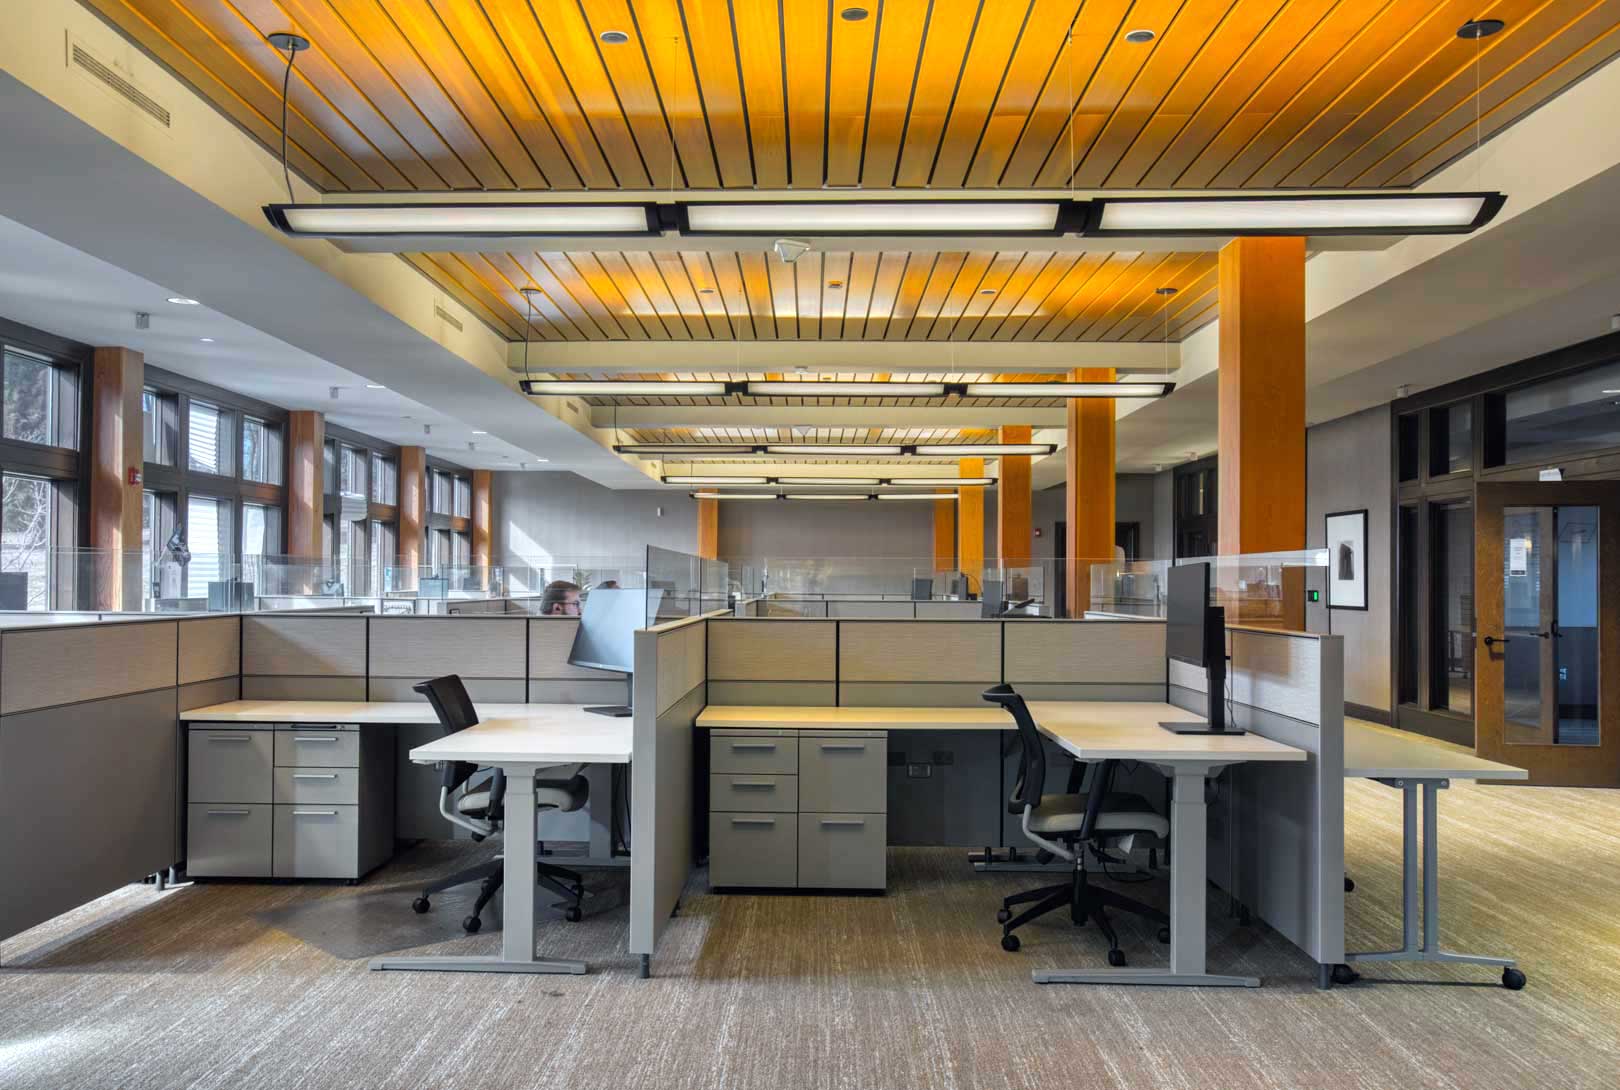 A modern office space with individual desk cubicles surrounded by windows and wooden plank ceilings